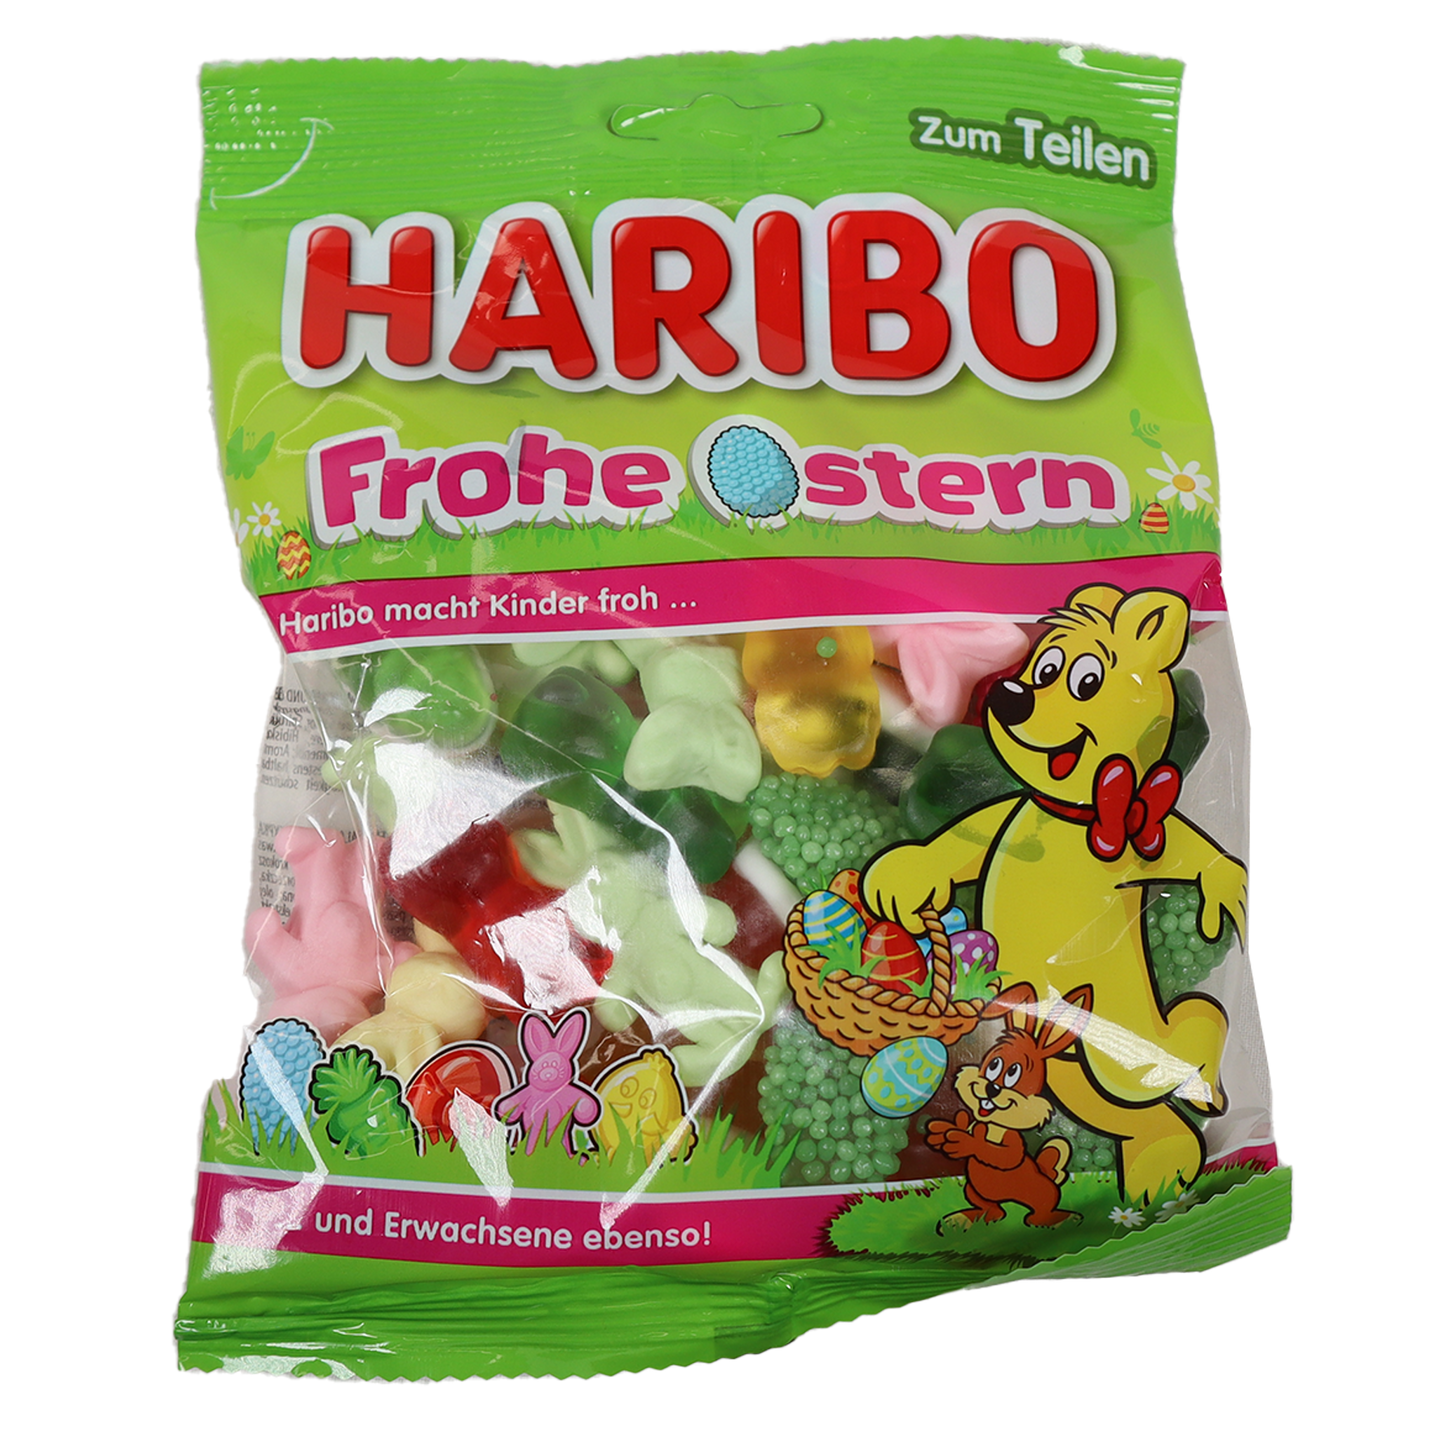 Haribo Frohe Ostern (Happy Easter)